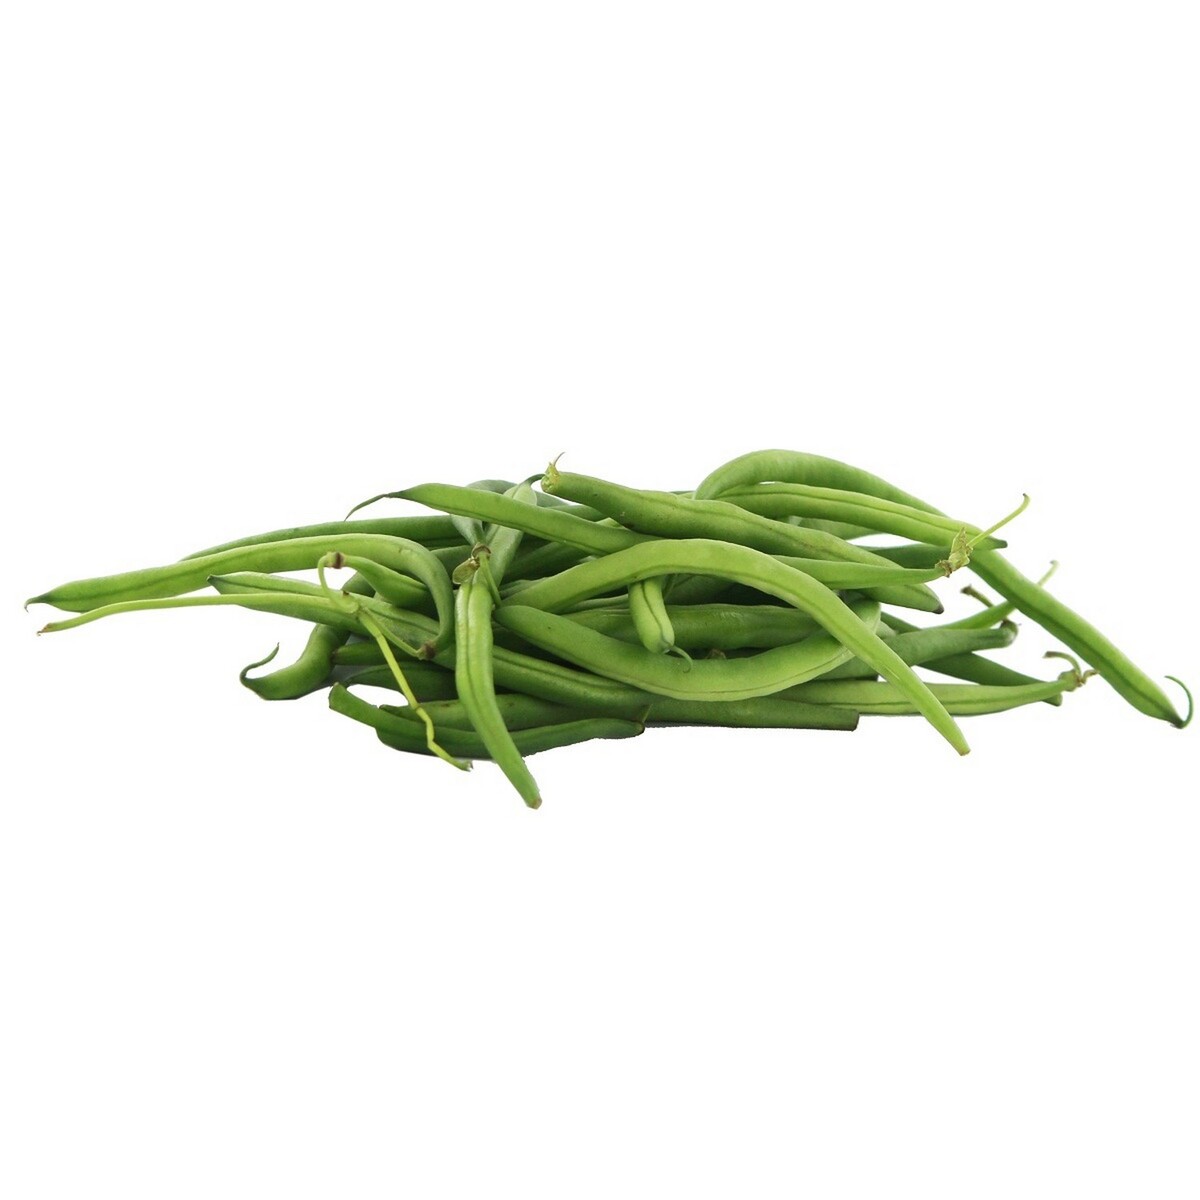 Haricot Beans Approx. 500g